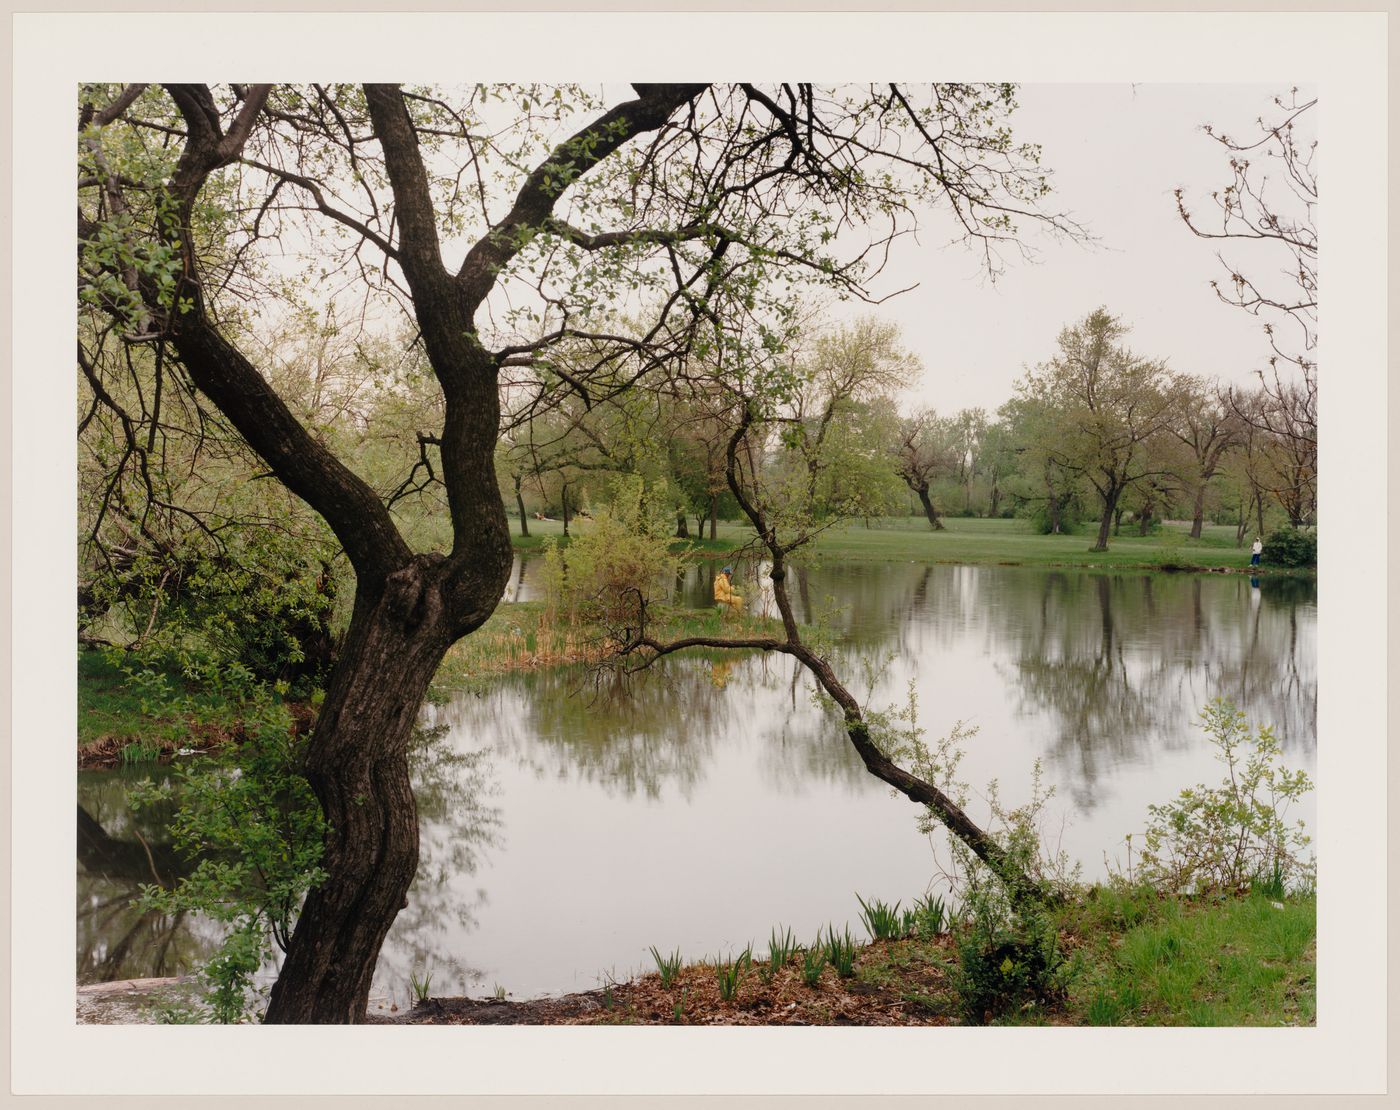 Viewing Olmsted: View of Mere, Washington Park, Chicago, Illinois